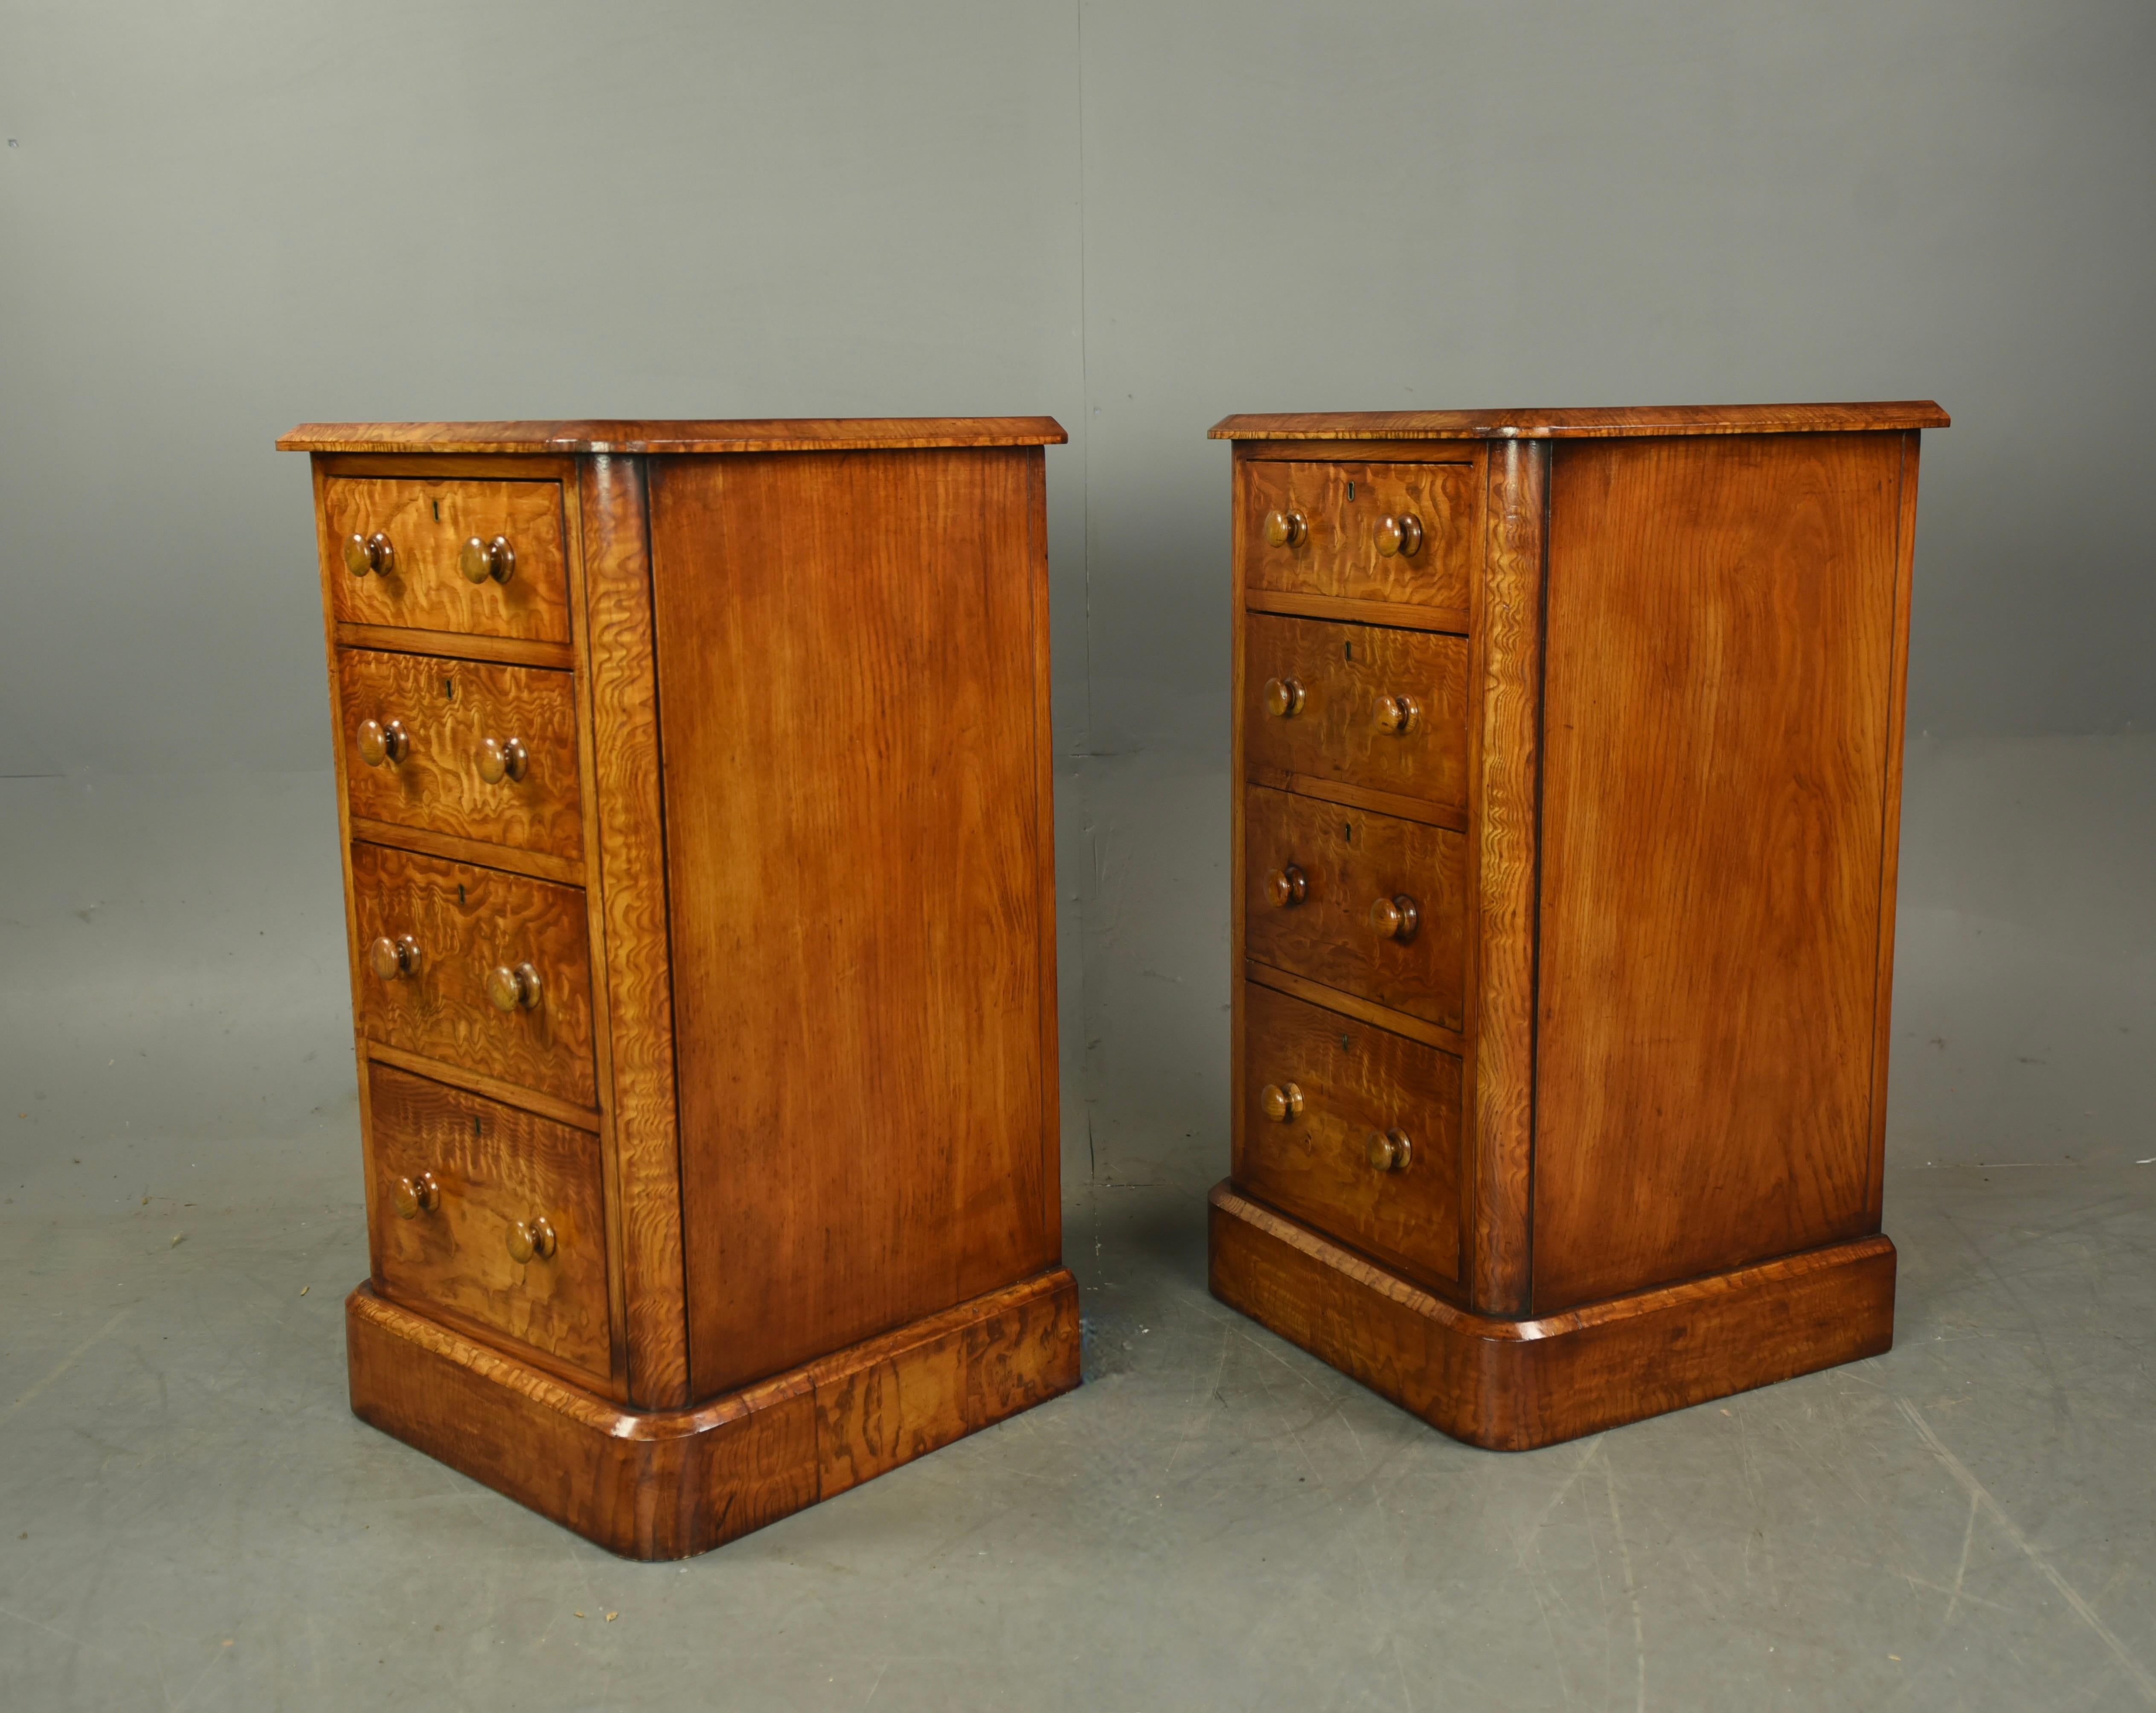 Fine Quality pair of Victorian bedside chests of drawers .
The chests are constructed of Hungarian Ashe a very rare pair ,
The have a unique grain and are a wonderful colour .
both have four graduating draws that are Ash lined with fine dovetail